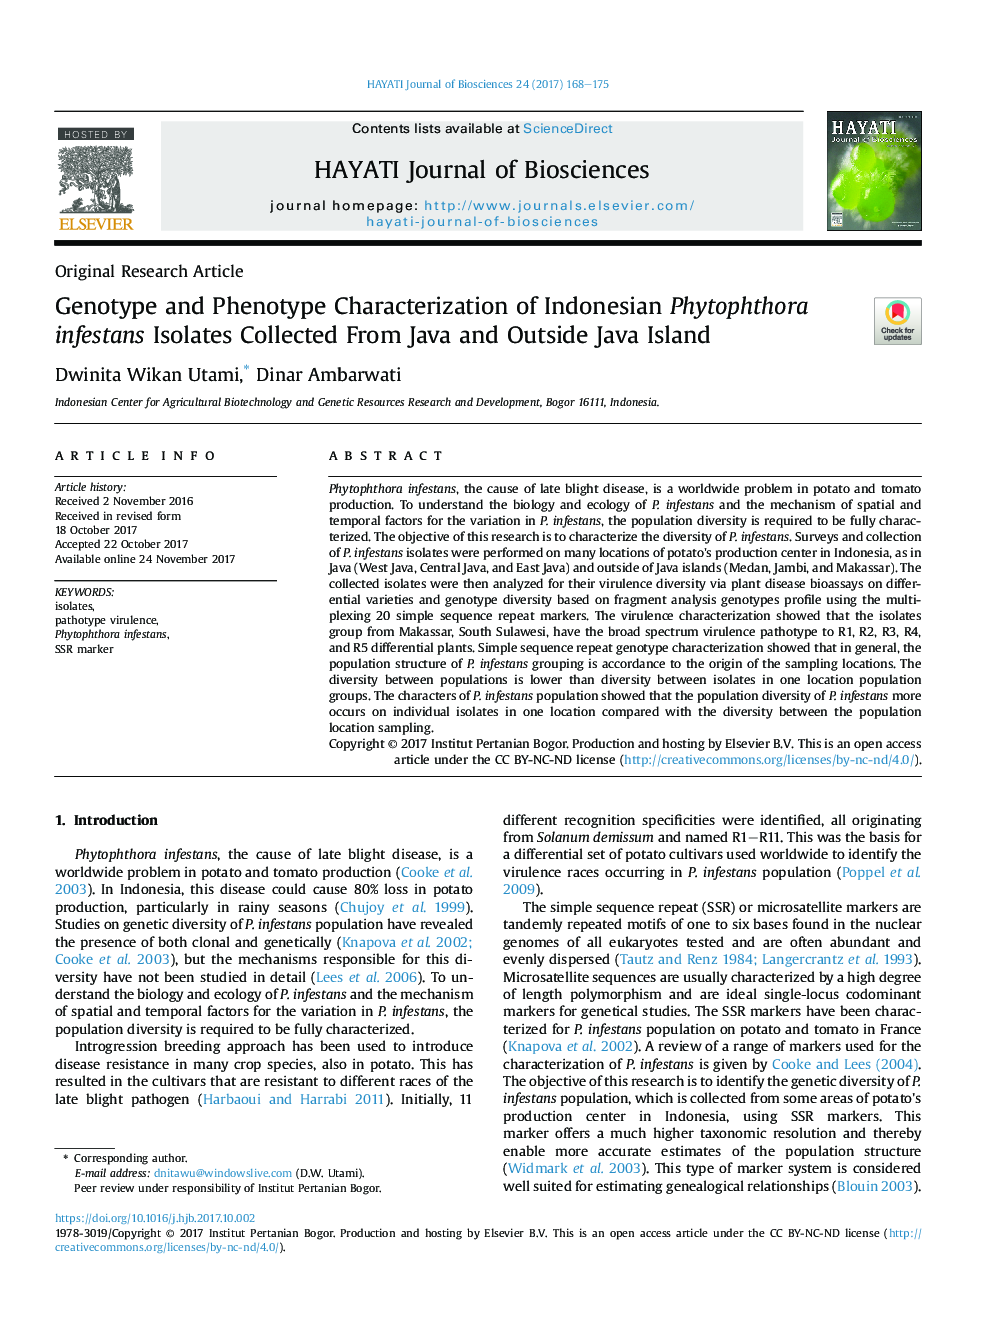 Genotype and Phenotype Characterization of Indonesian Phytophthora infestans Isolates Collected From Java and Outside Java Island